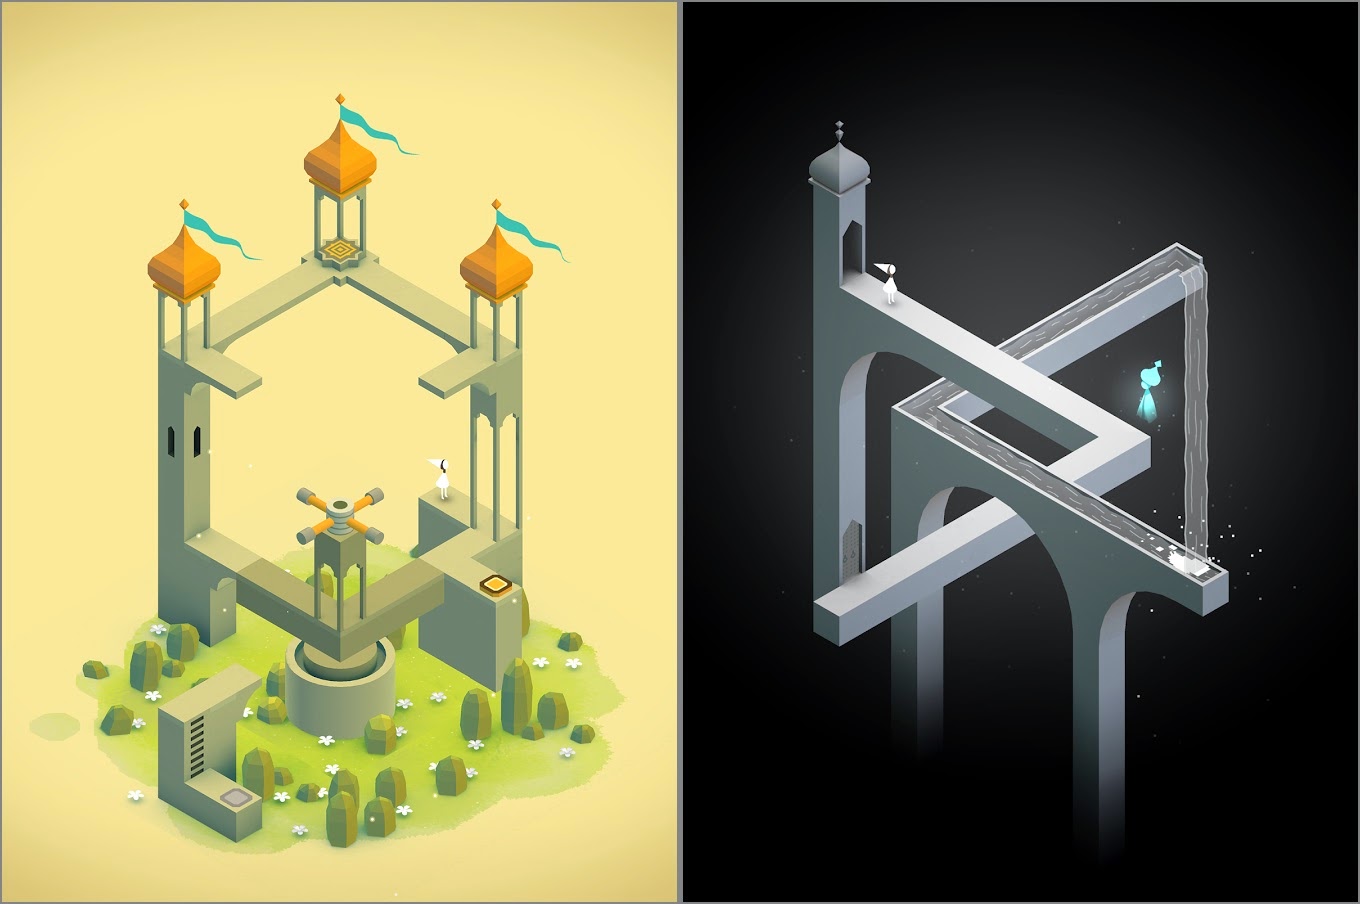 [Juego] Monument Valley Apk v1.0.5.3 + Data Mod Levels Monument+Valley+3-horz